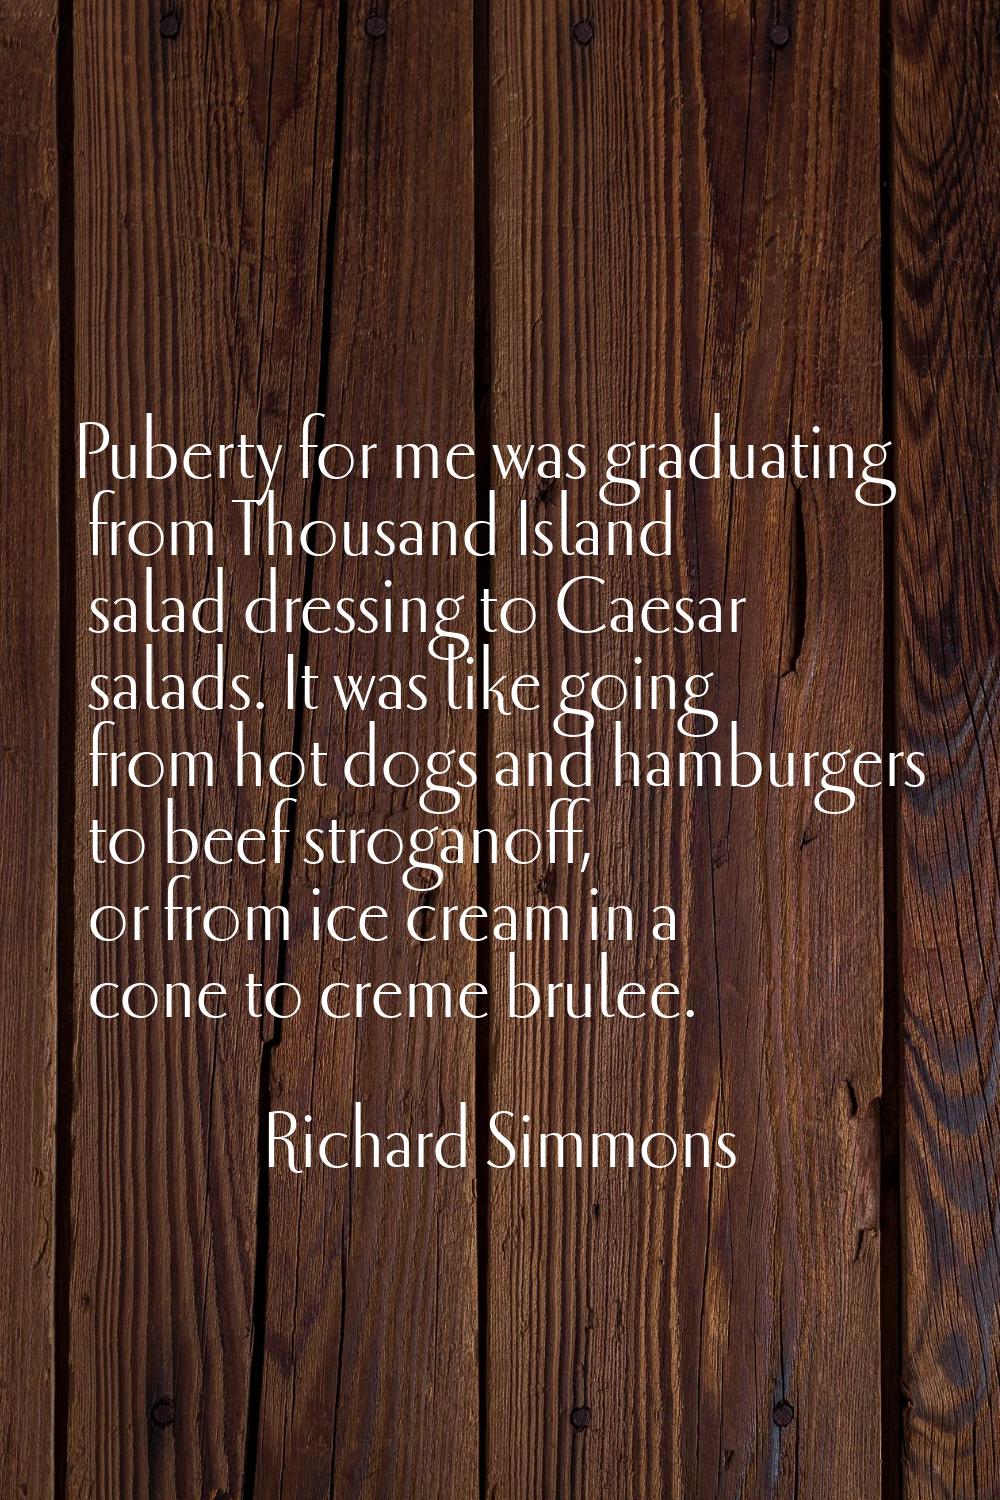 Puberty for me was graduating from Thousand Island salad dressing to Caesar salads. It was like goi